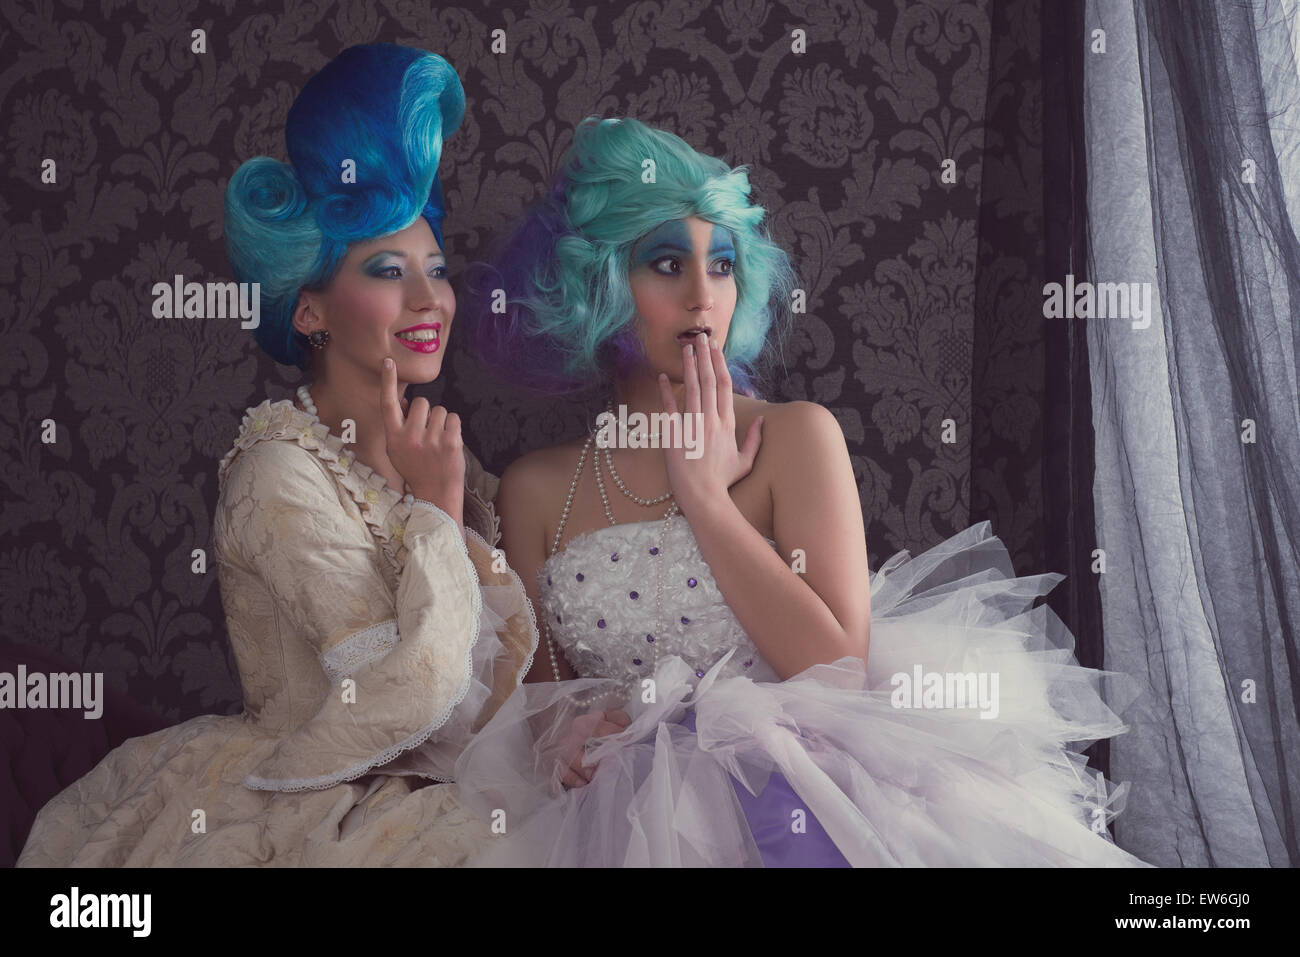 Two women in prom or historical dresses Stock Photo